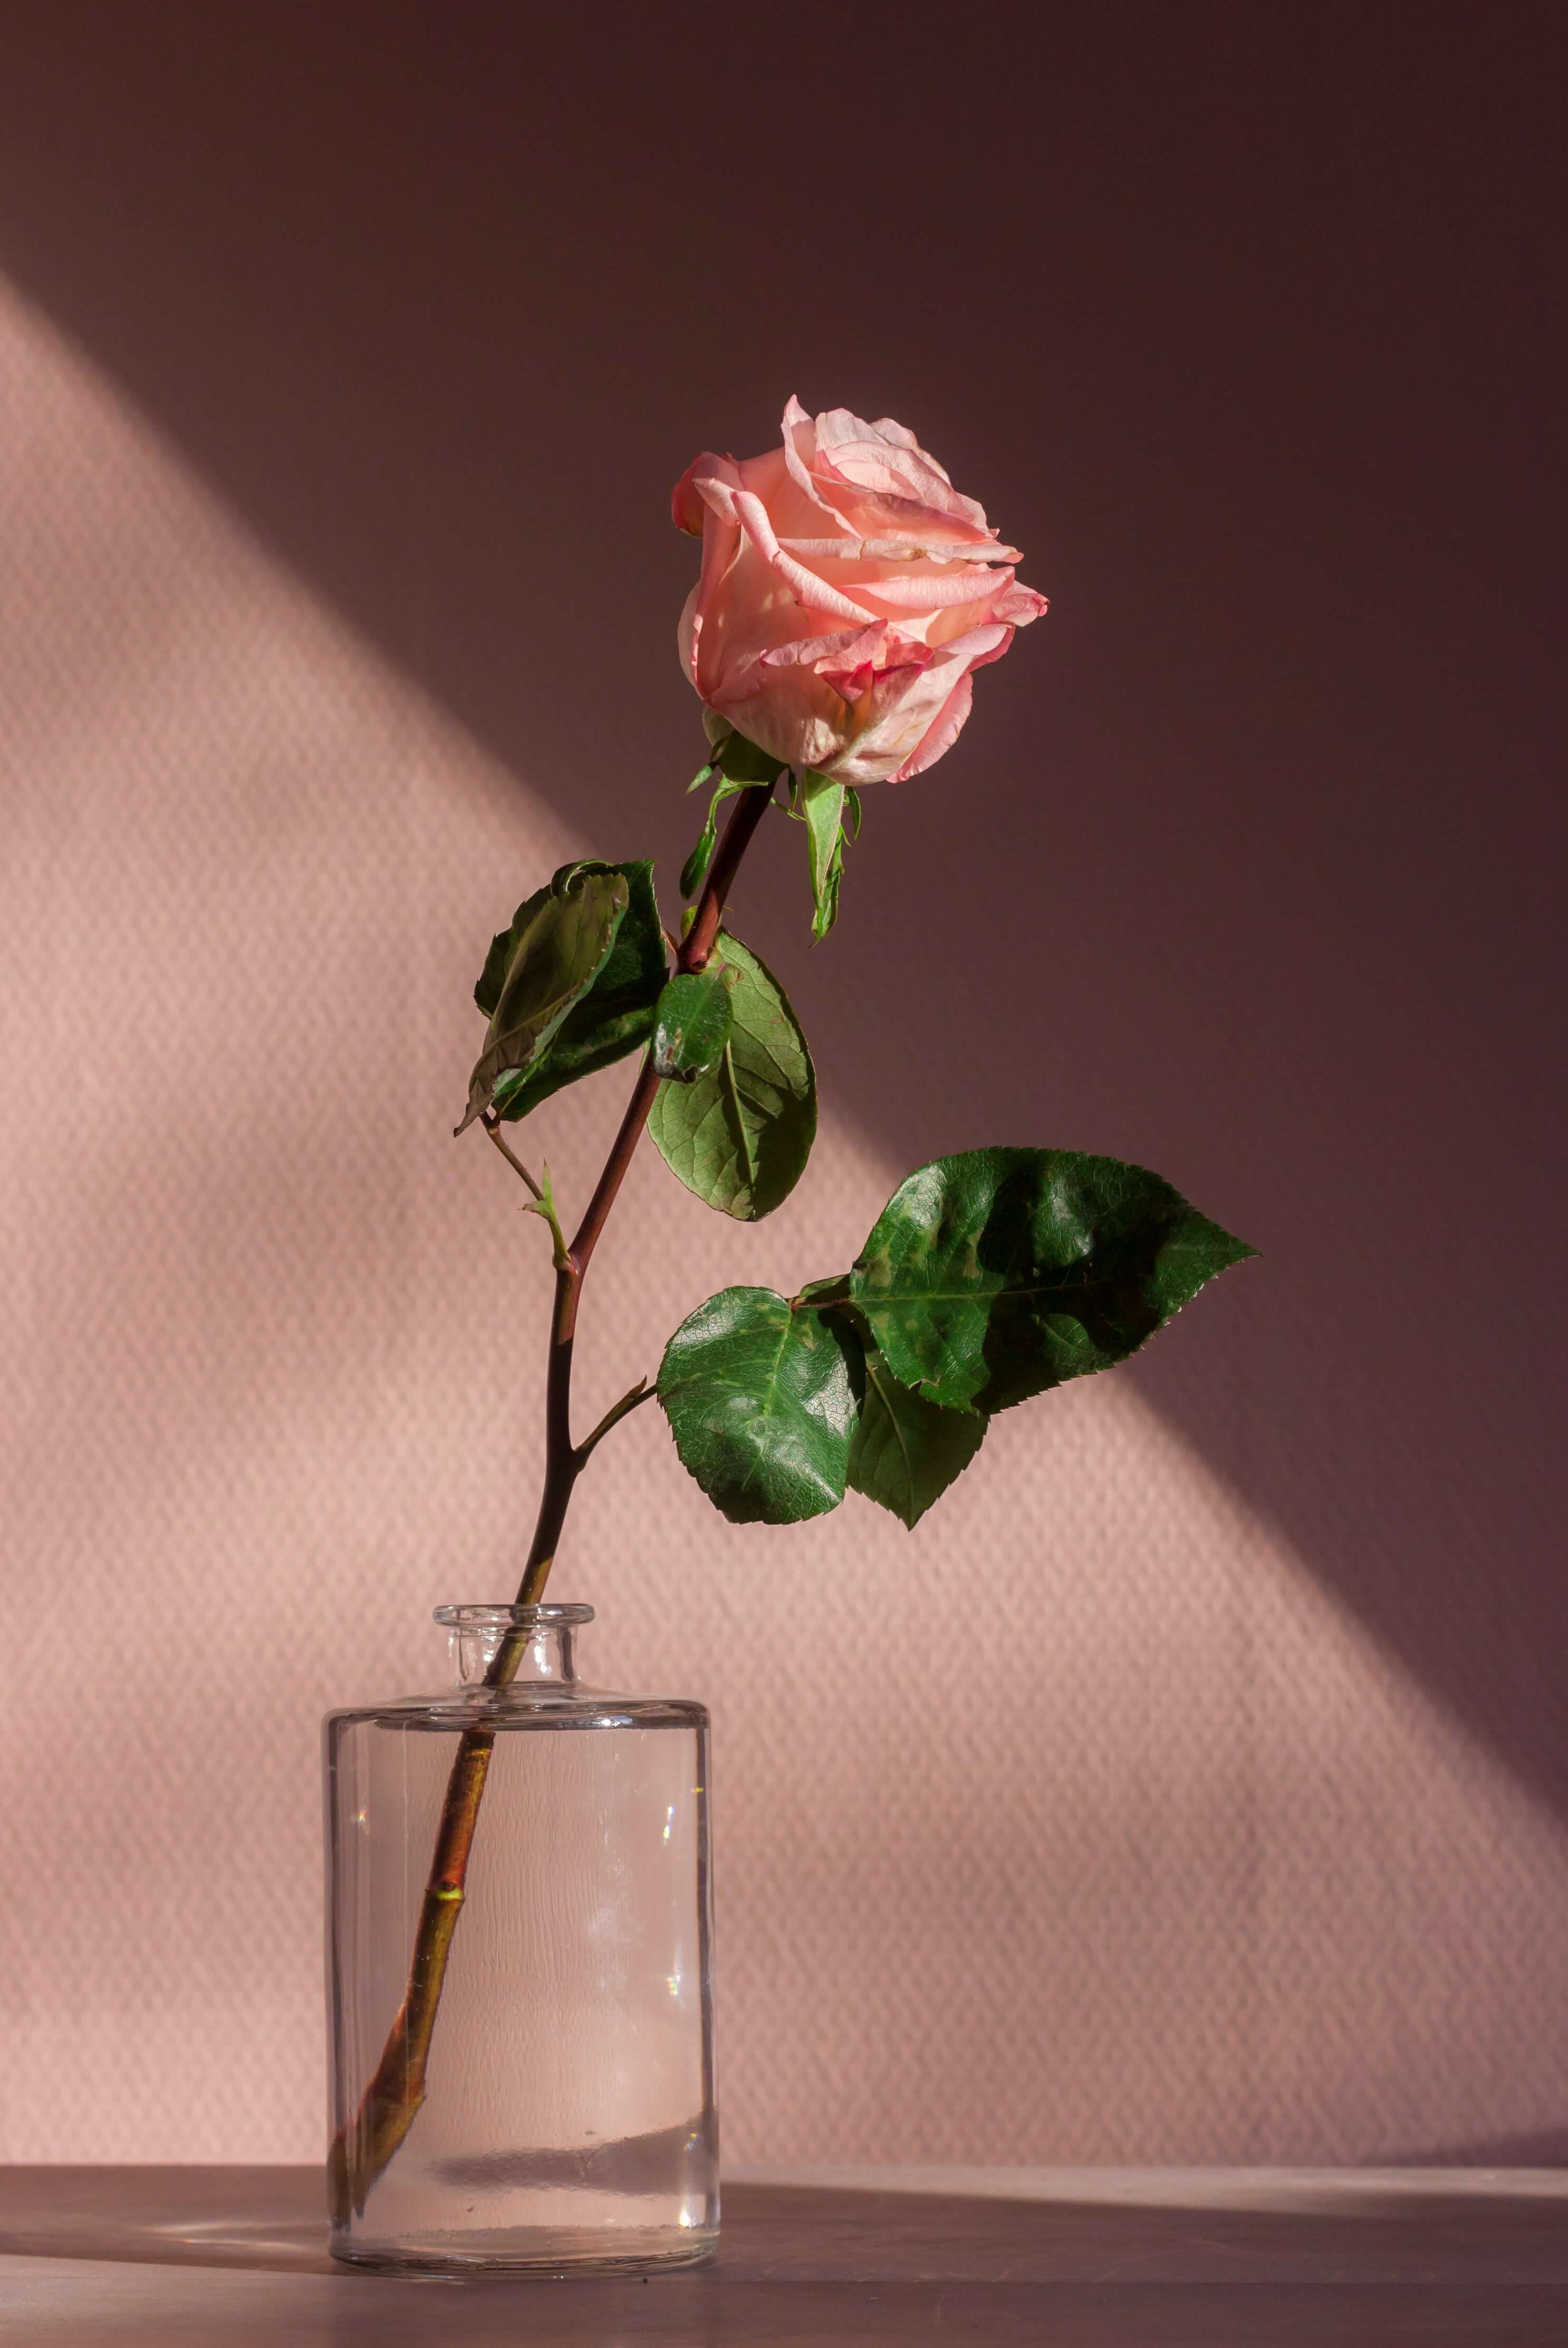 A pink rose against a pink background